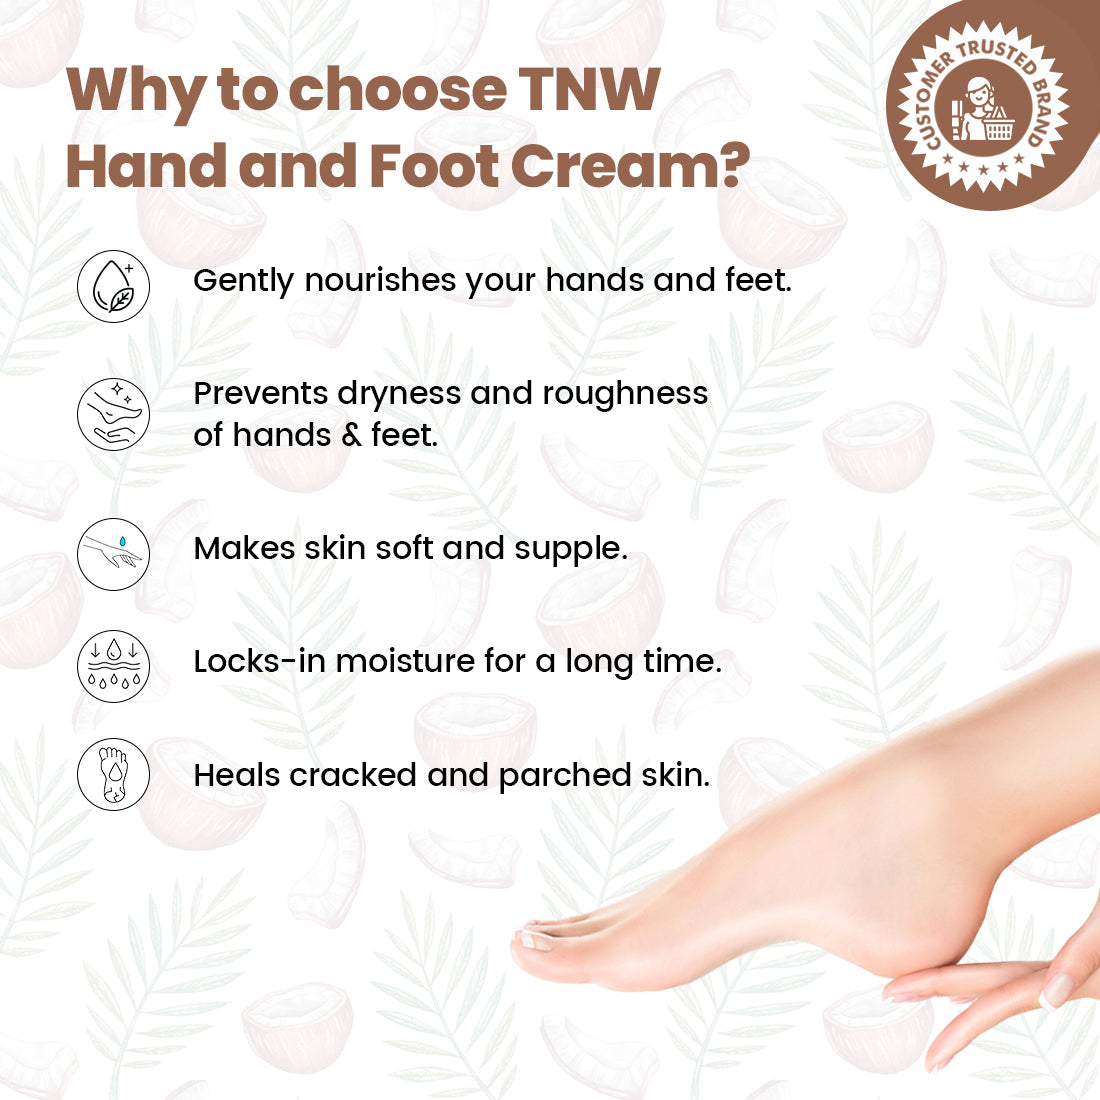 Hand and Foot Cream for Nourished Hand & Feet  ( Non-Sticky and Quick Absorbing ).